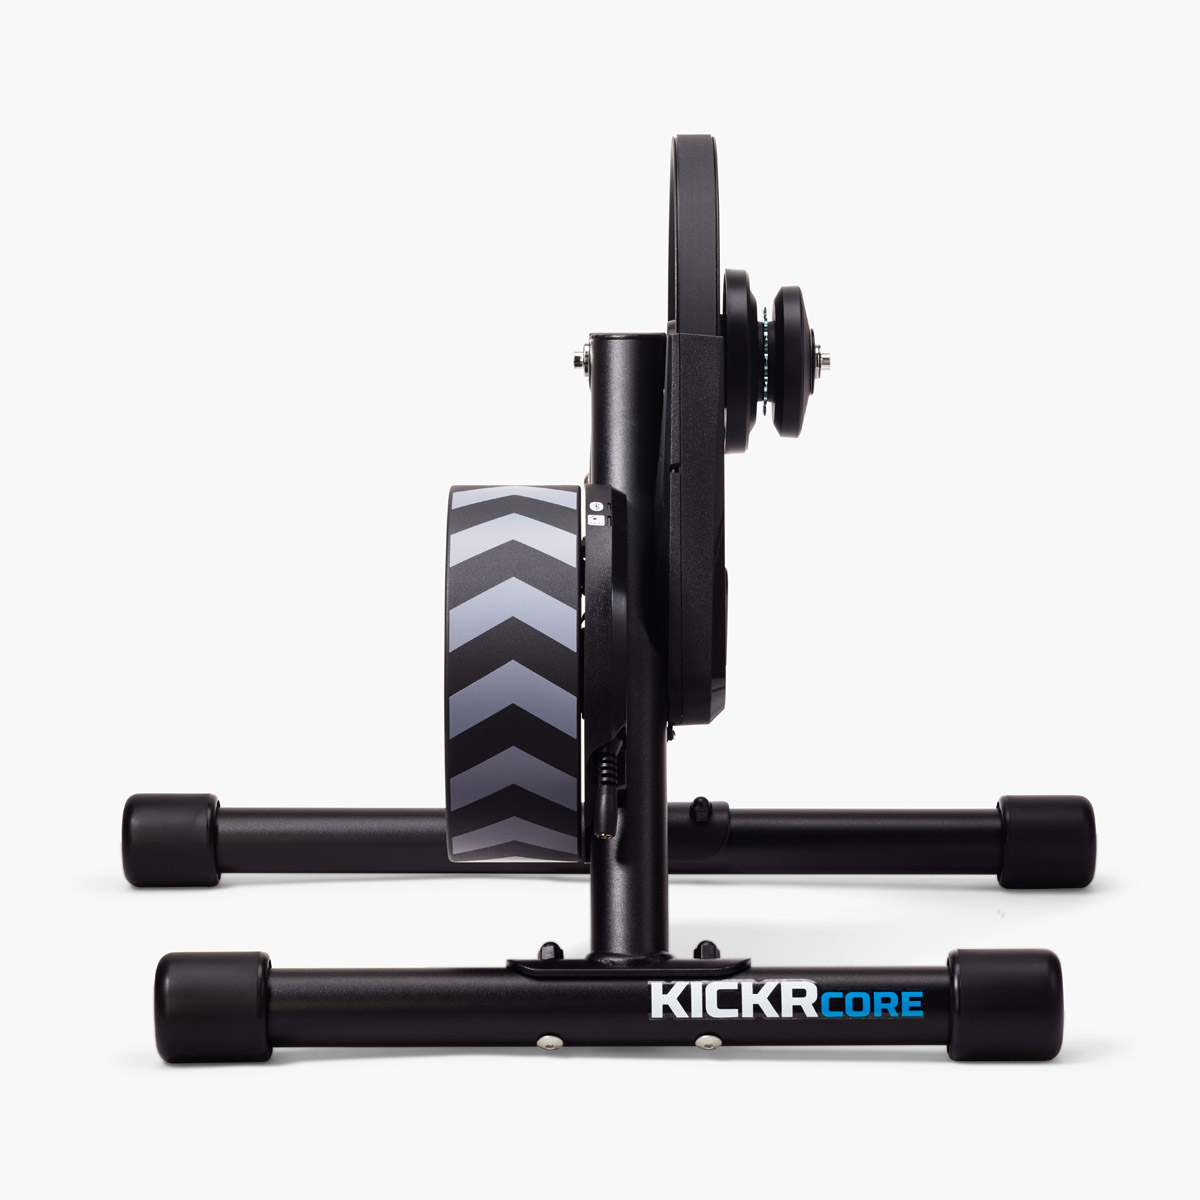 Wahoo KICKR Core Zwift One Smart Trainer: Unboxing, Setup, and Full Review